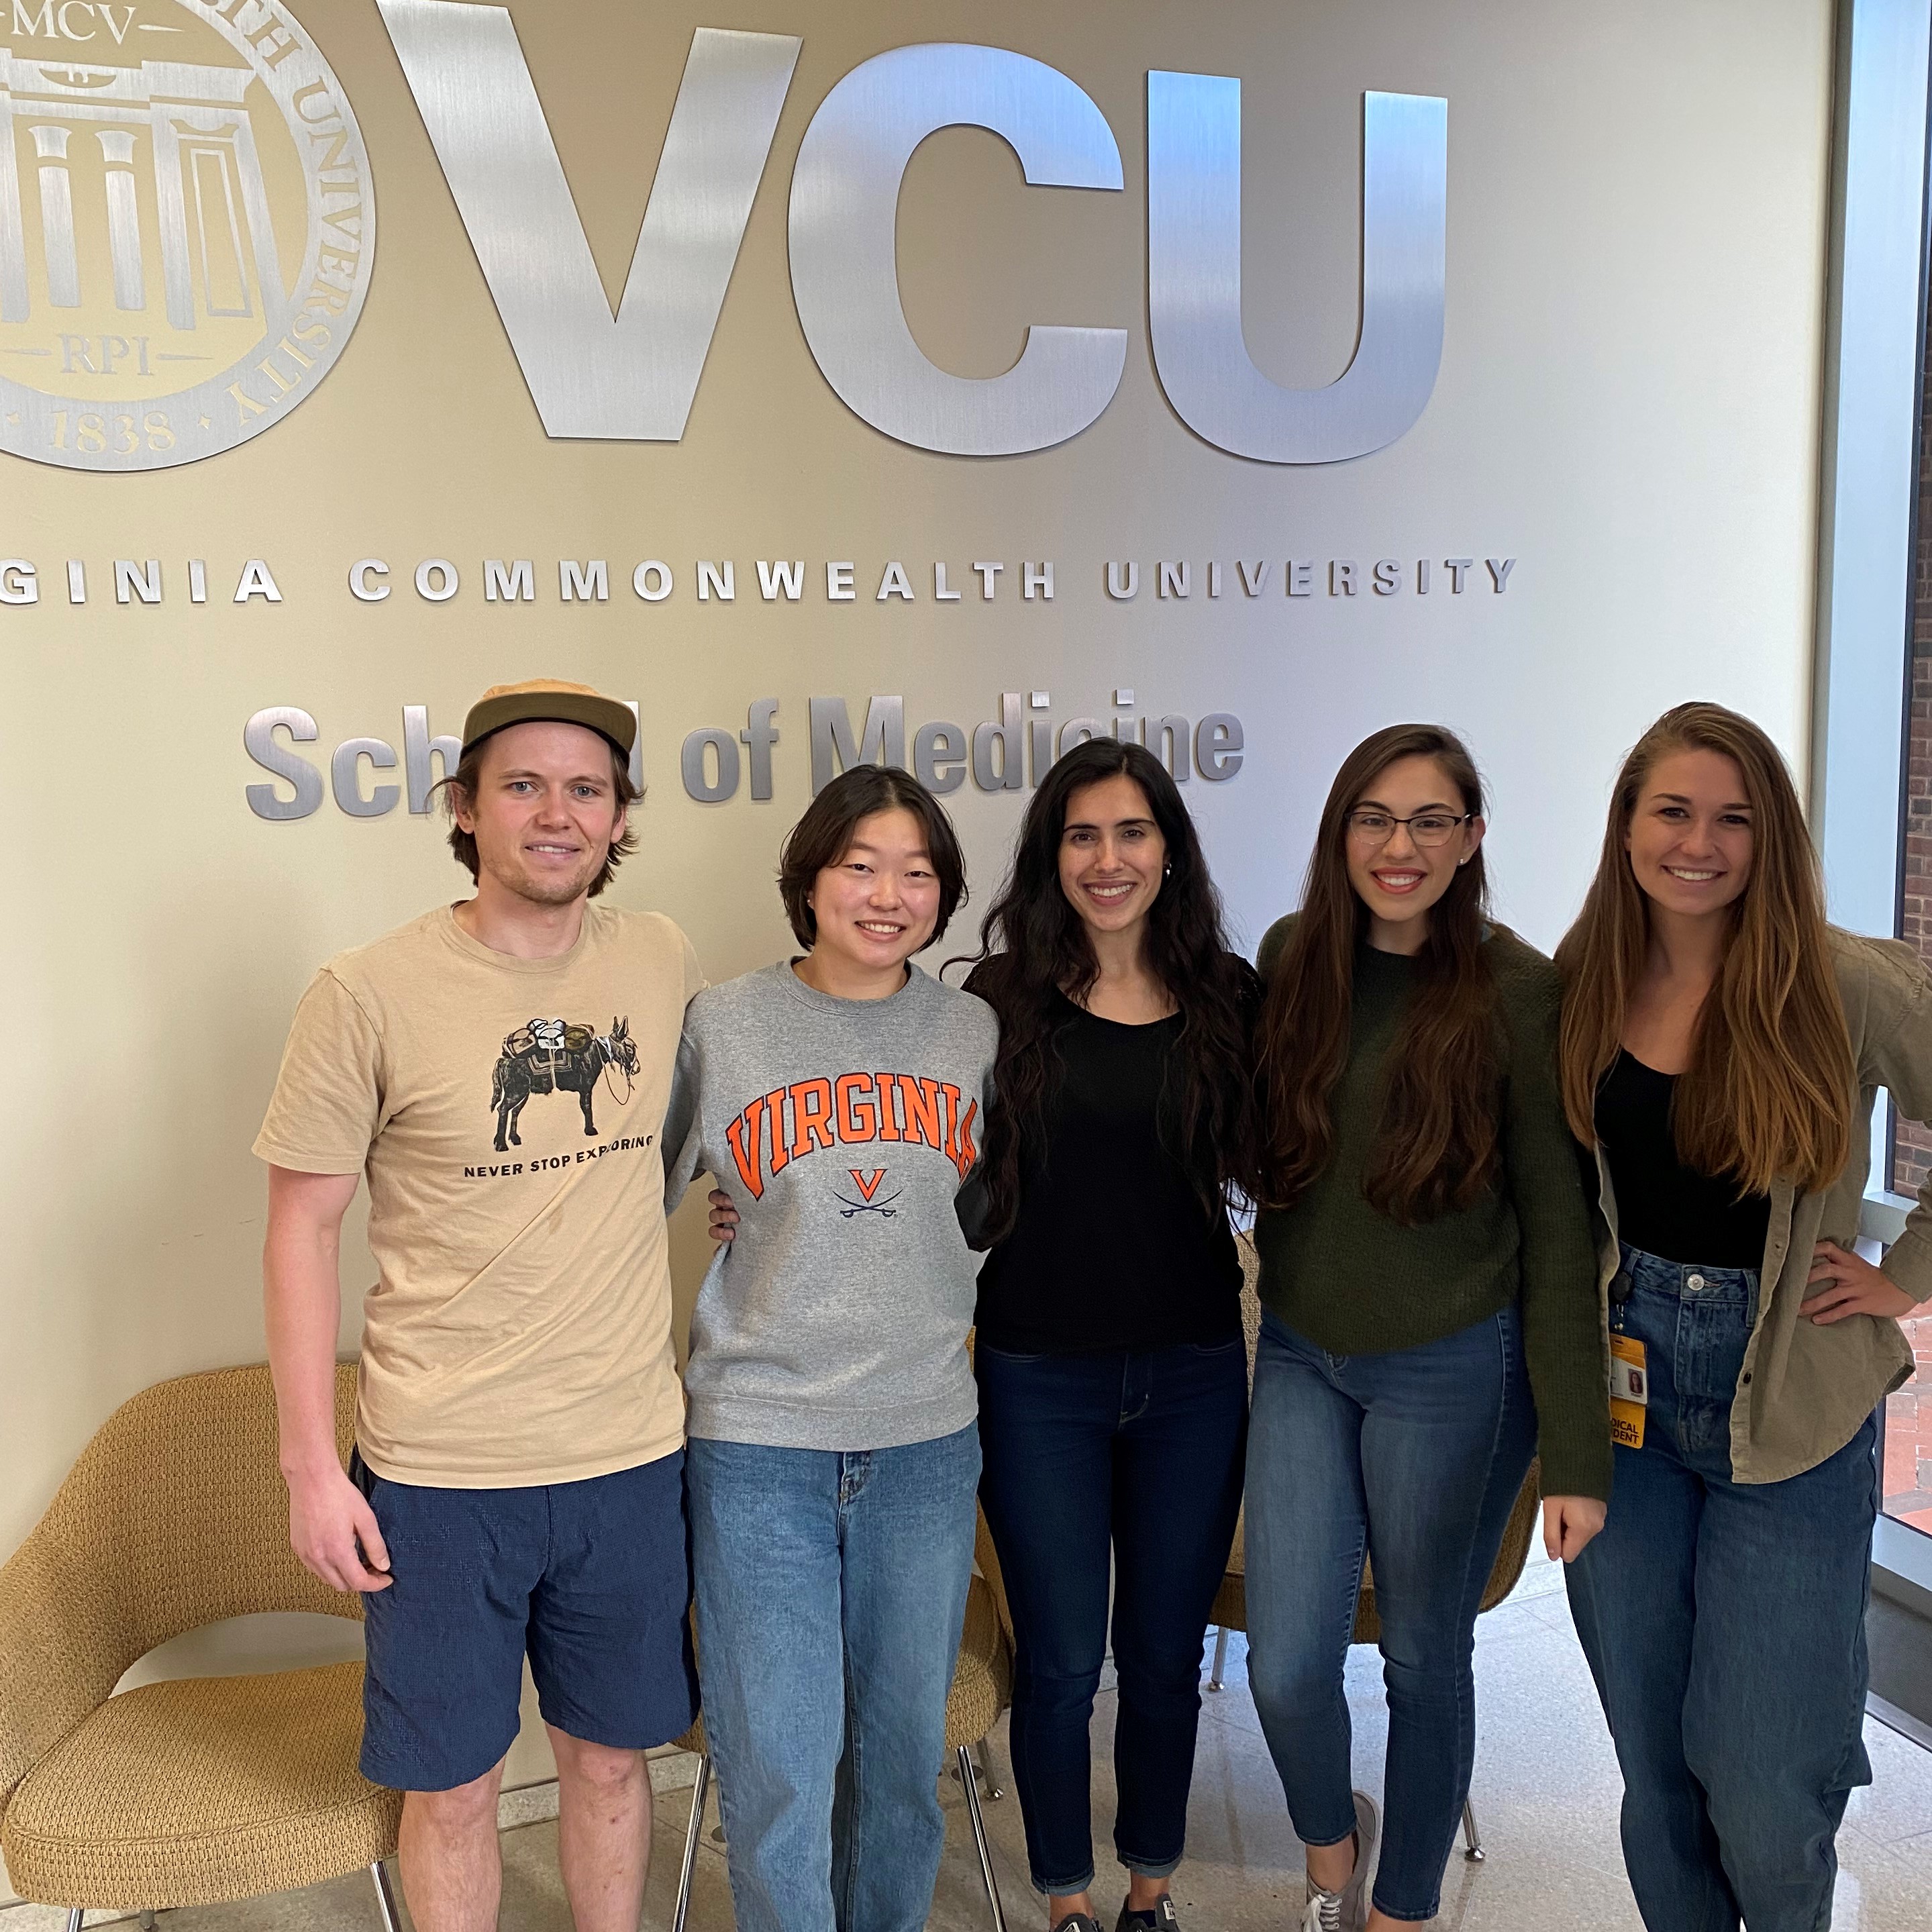 Latino Medical Student Association executive board: Jeremy Allred, M2, language co-chair (far left), Annette Min, M2, language co-chair (second from left), Demitra Chavez, M2, president (middle), Rebecca Moncayo, M2, outreach coordinator (second from right), Claudia Bale, M2, treasurer (far right)